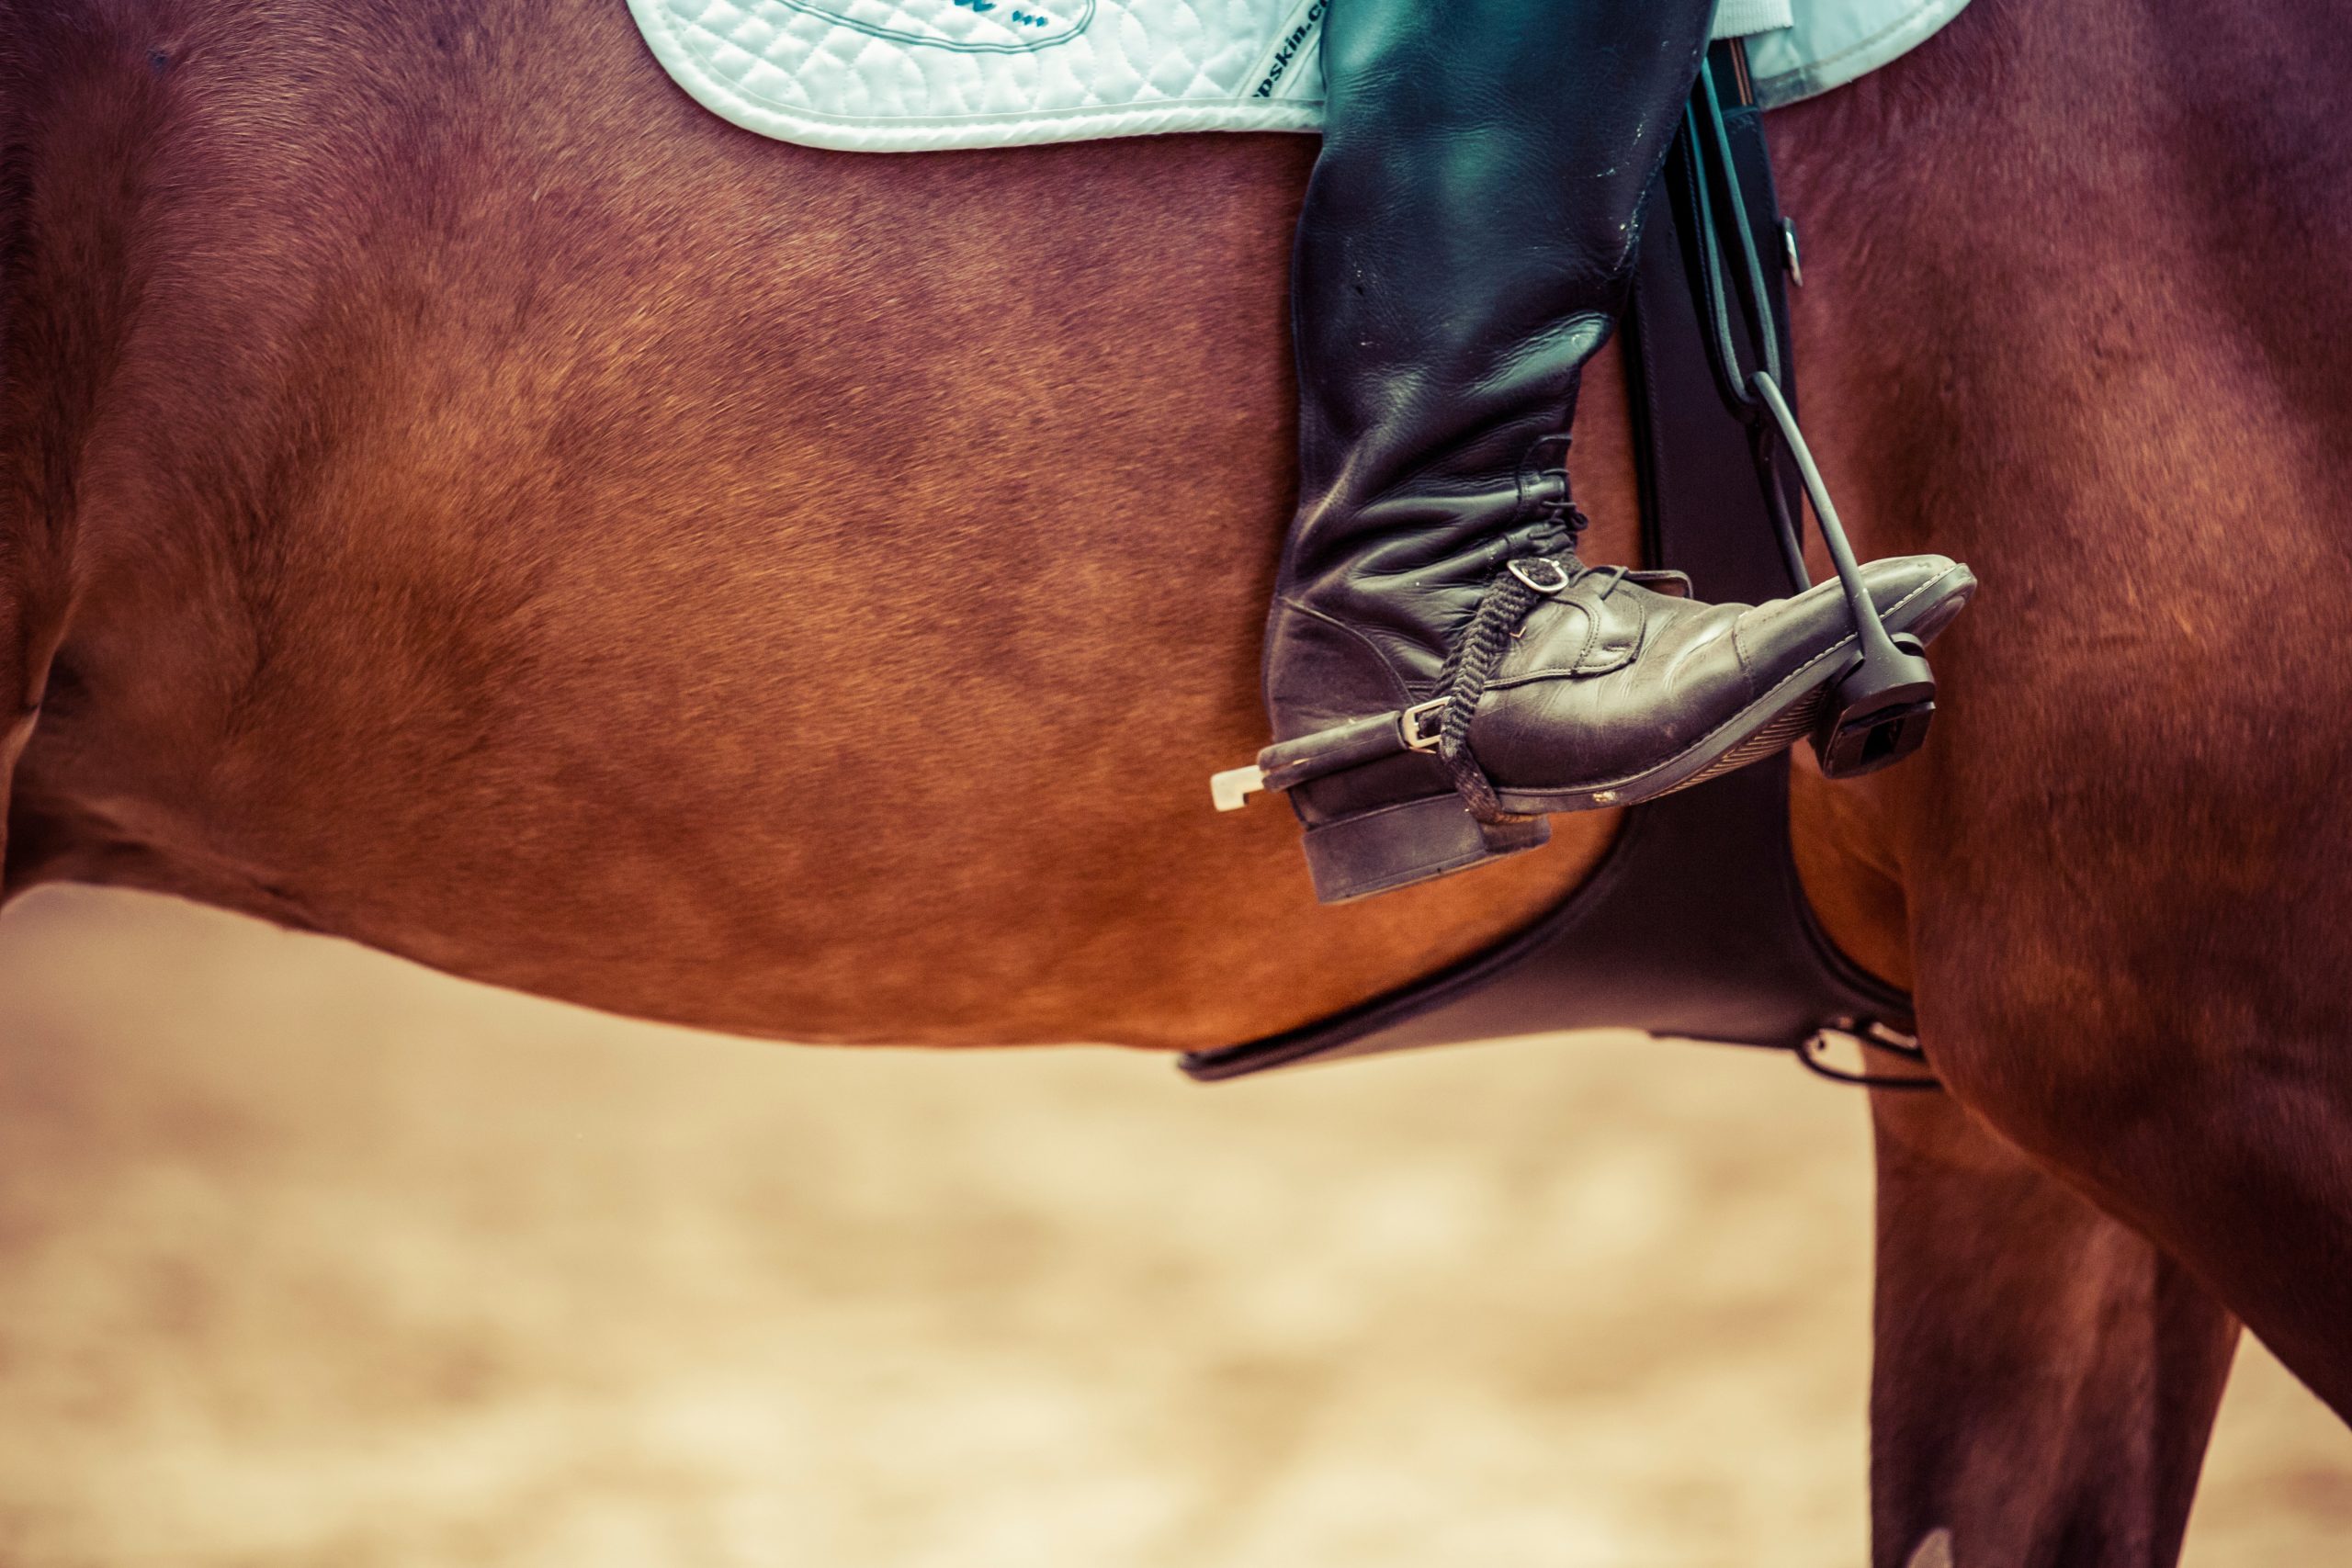 Horse Riders Have The “Right Stuff”